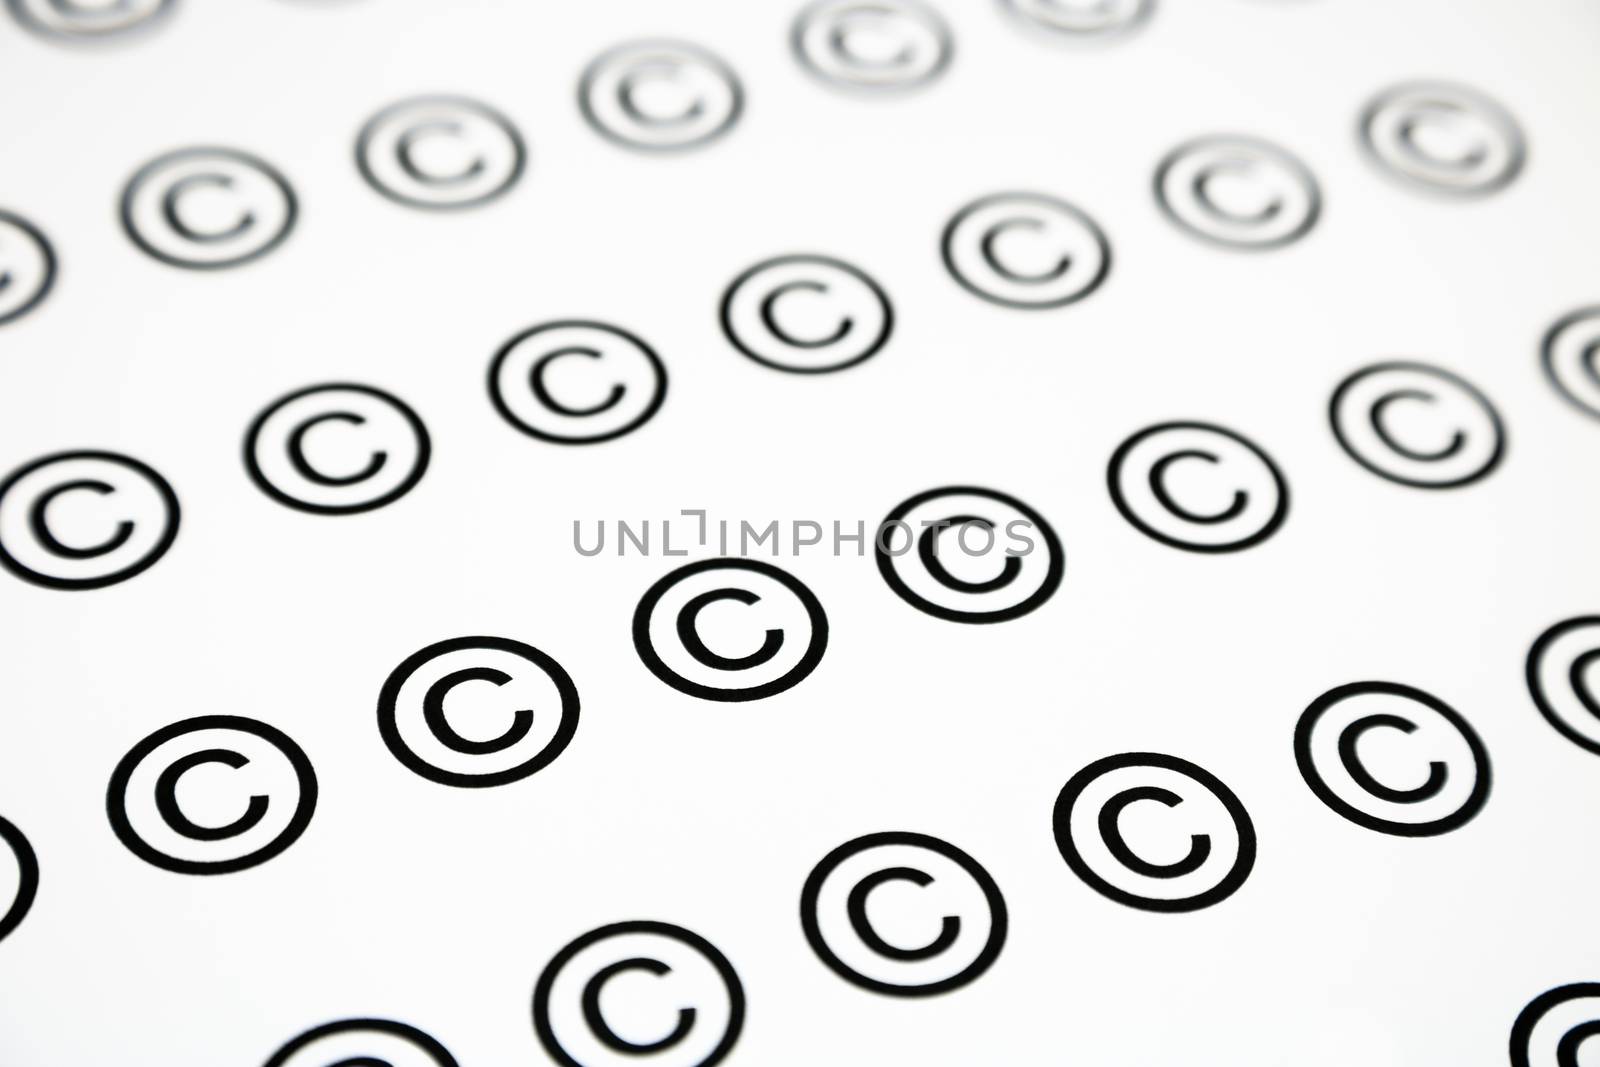 copyrighted sign by vinnstock